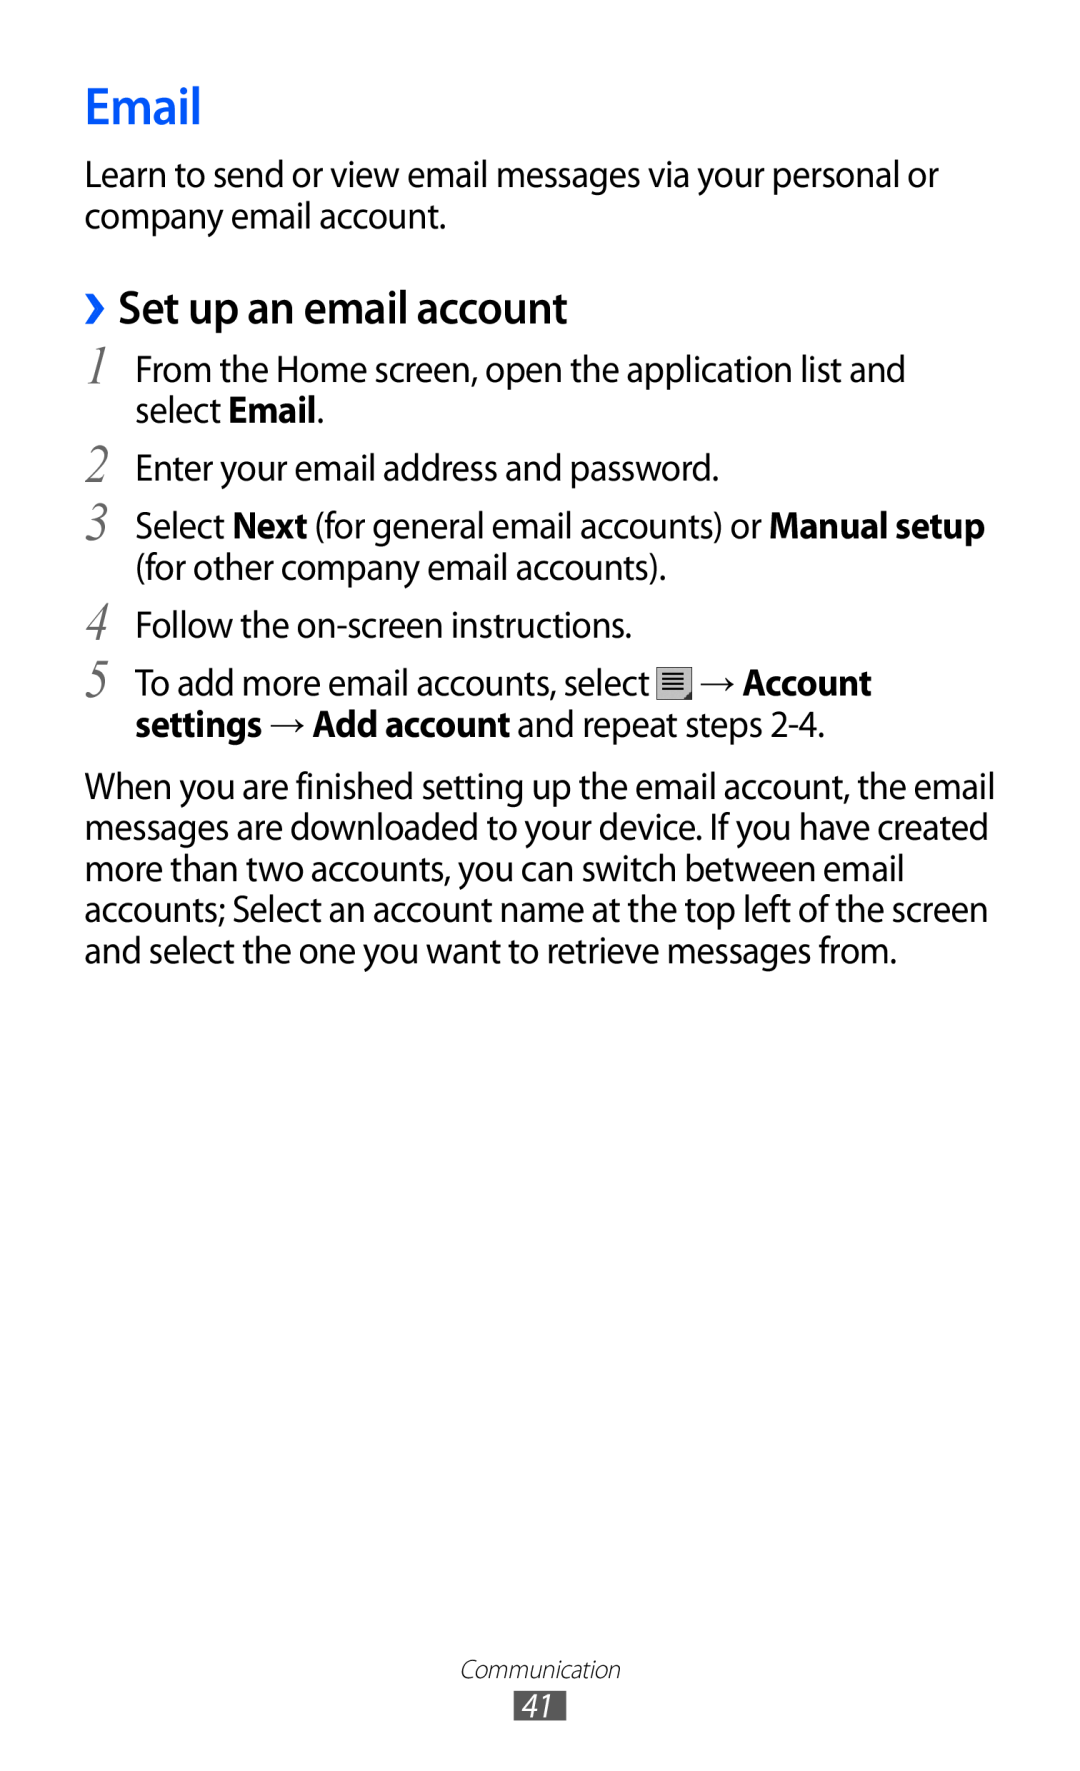 Samsung GT-P7510 user manual Email, ››Set up an email account, settings → Add account and repeat steps 